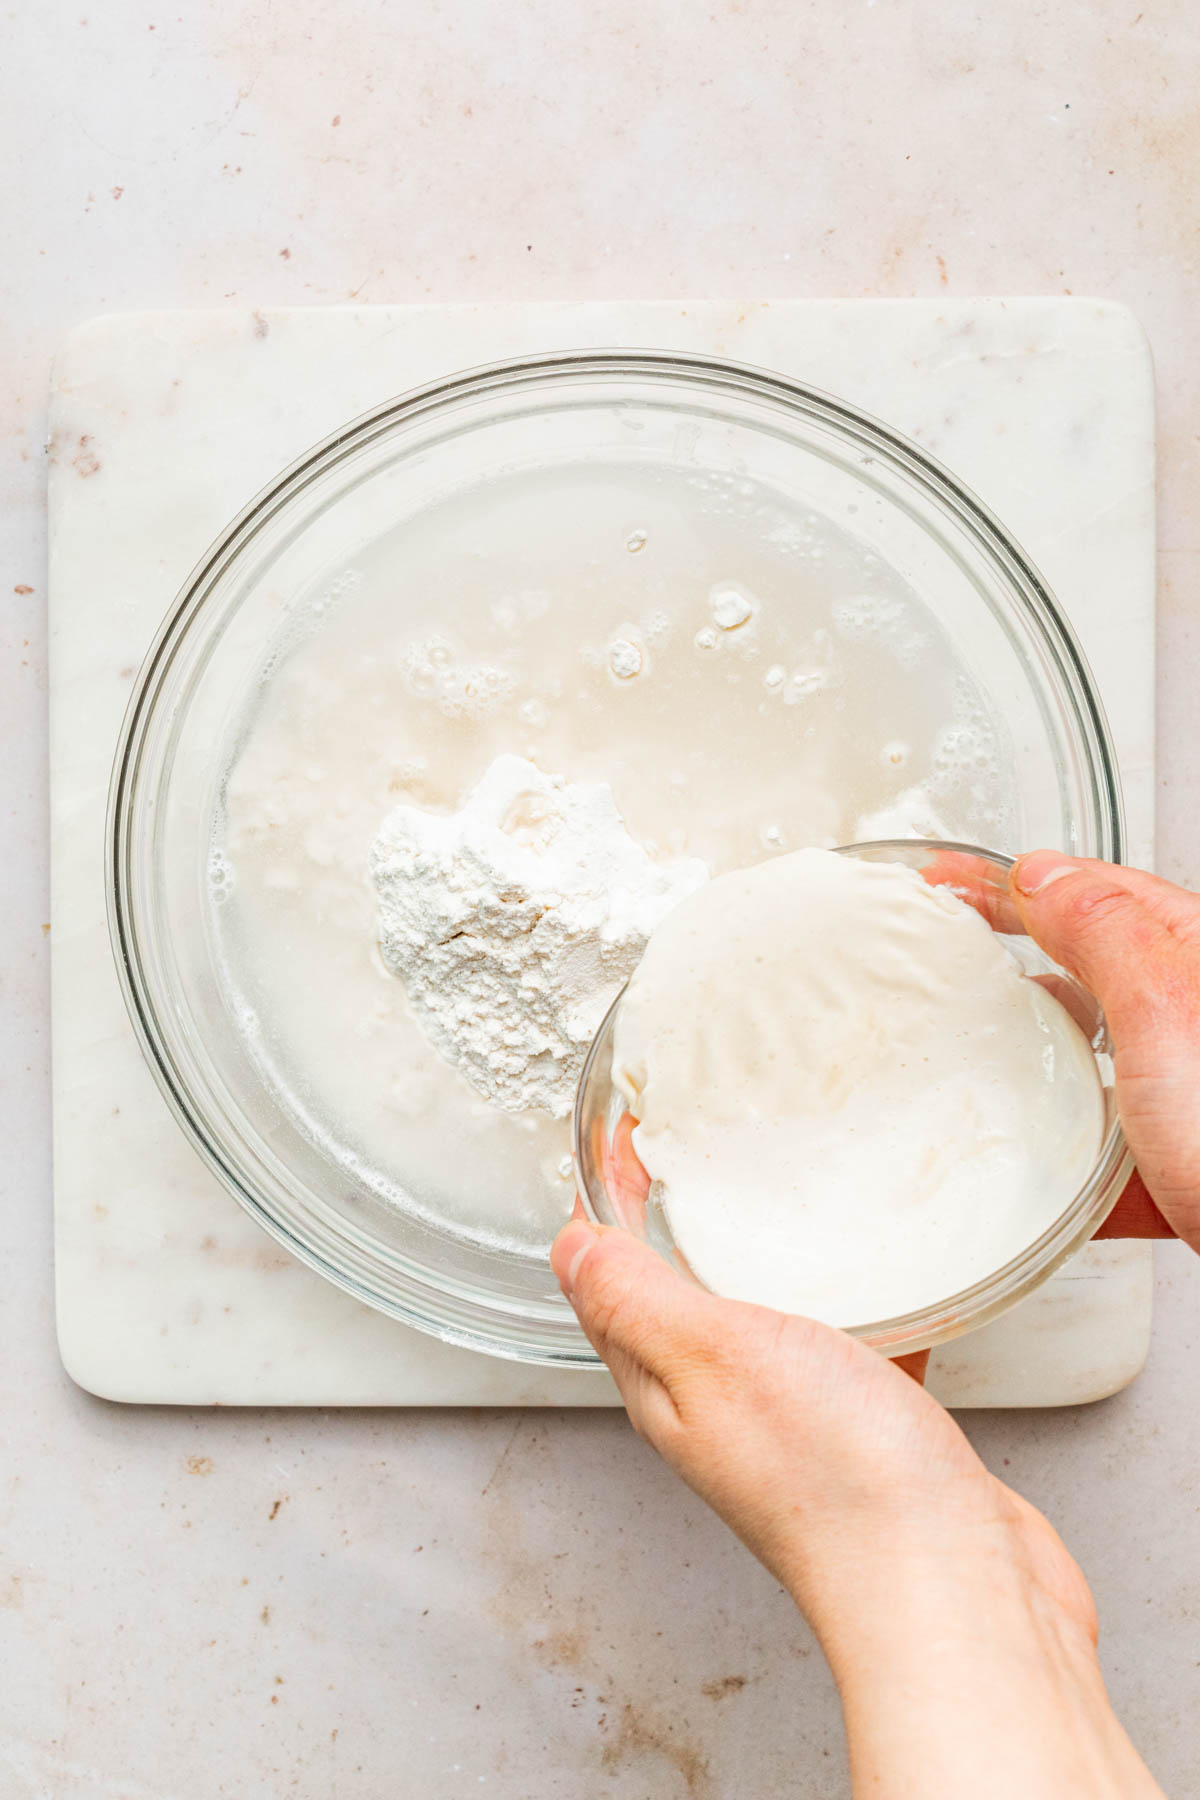 Hands holding a bowl of sourdough starter and pouring it into a bowl of water and flour.